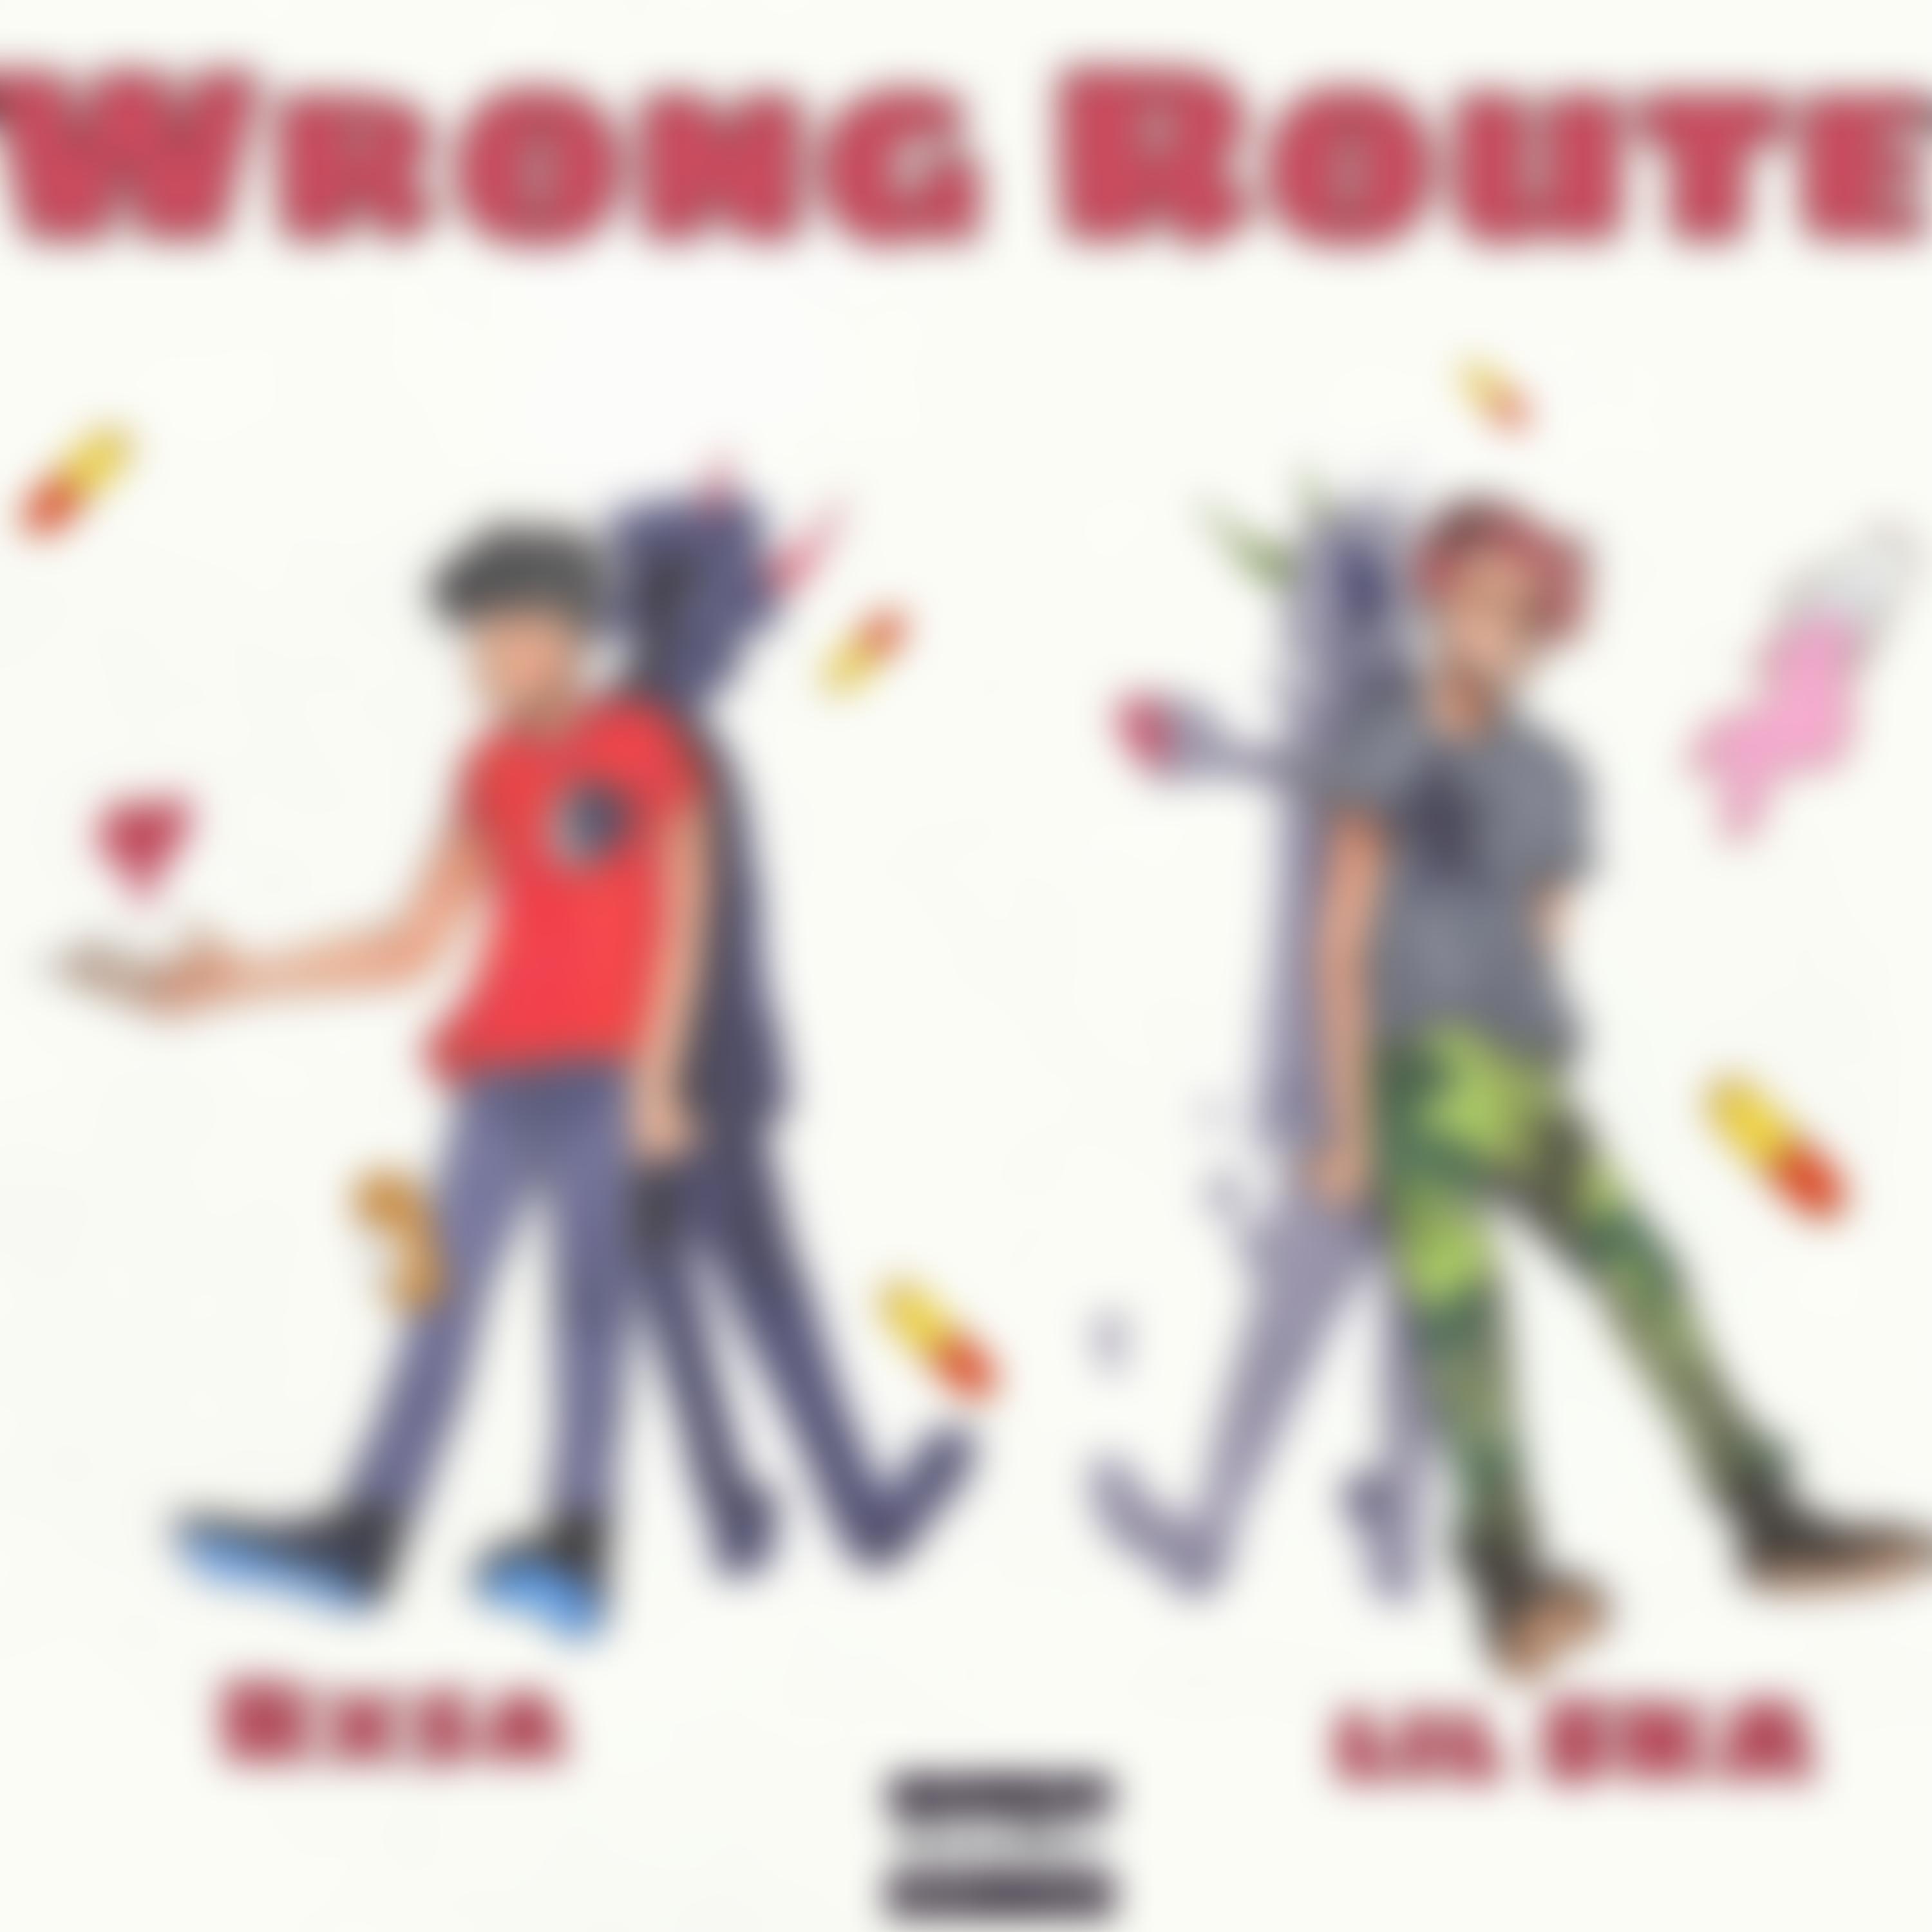 Lil SKA - Wrong Route (feat. The Kidd Rxsa)